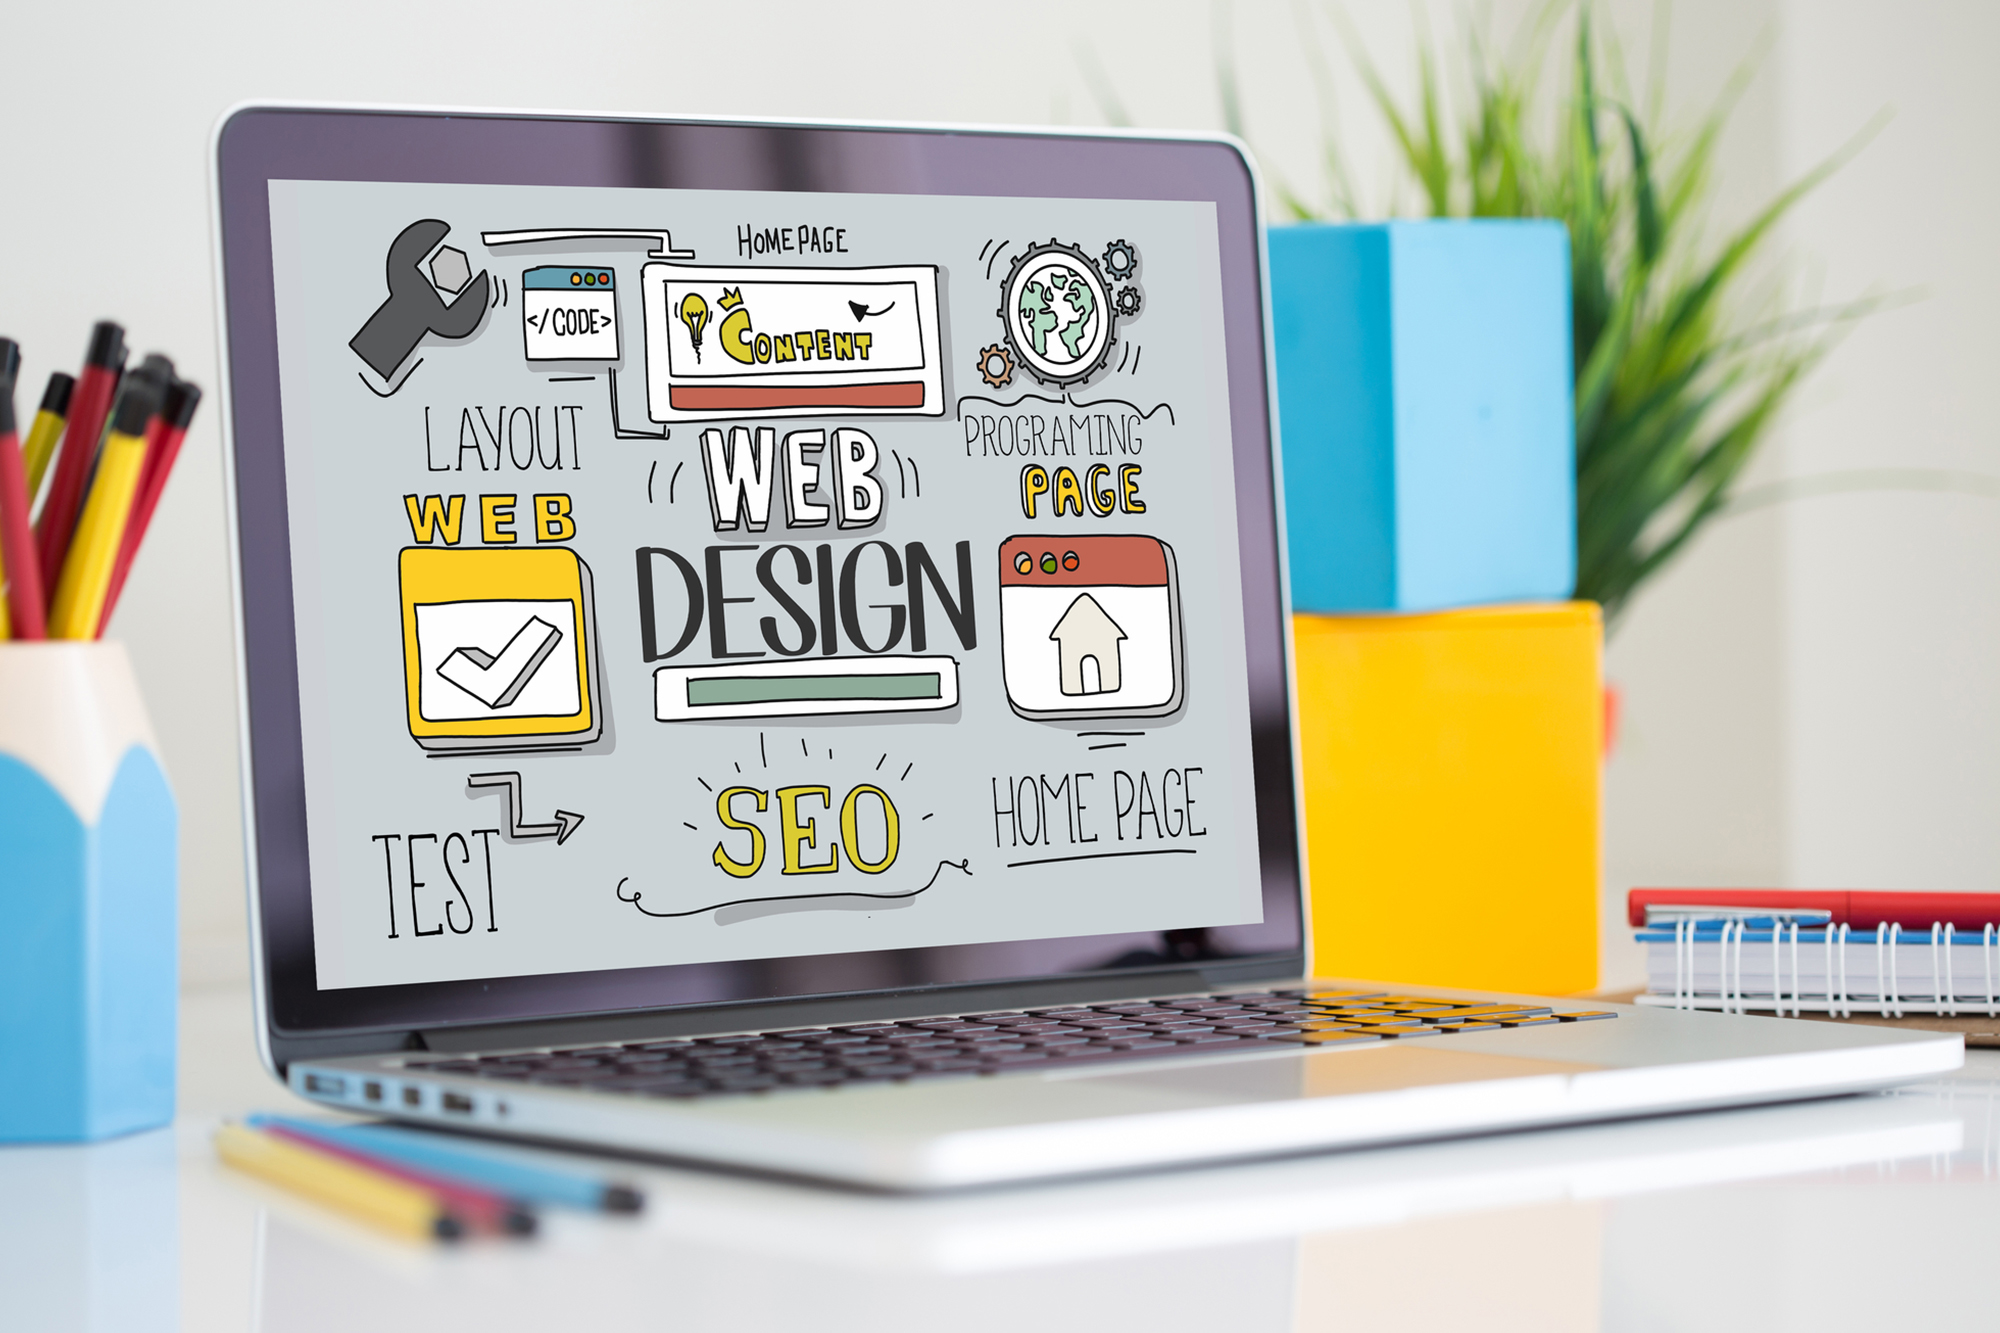 call-us-for-design-web